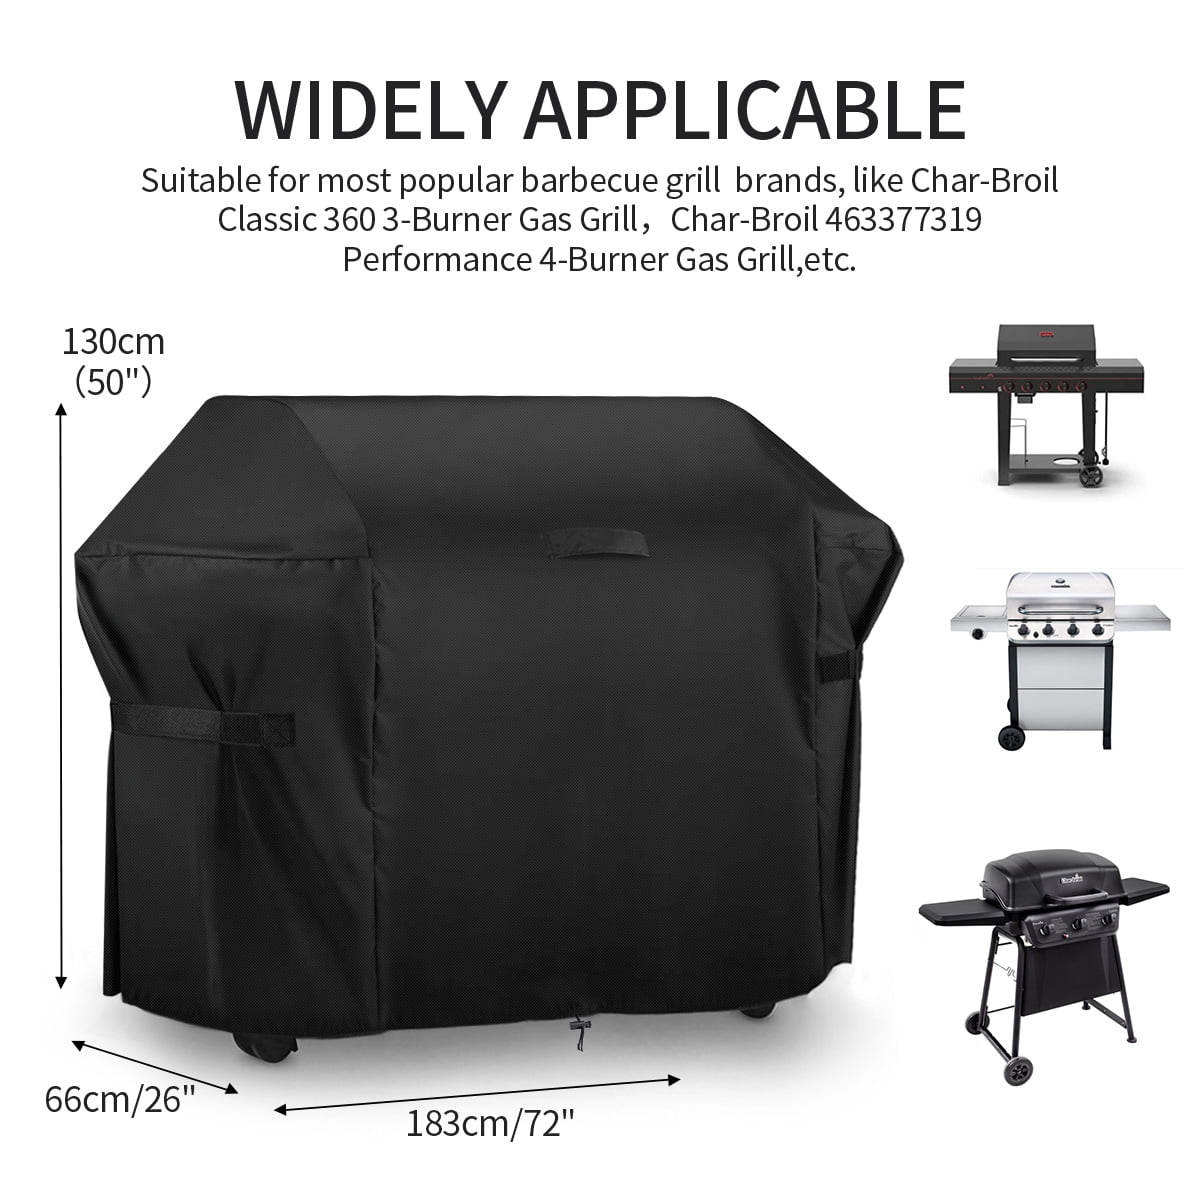 72" BBQ Grill Cover XLarge For Weber Summit S470 & Char Broil 6 Burner Gas Grill 